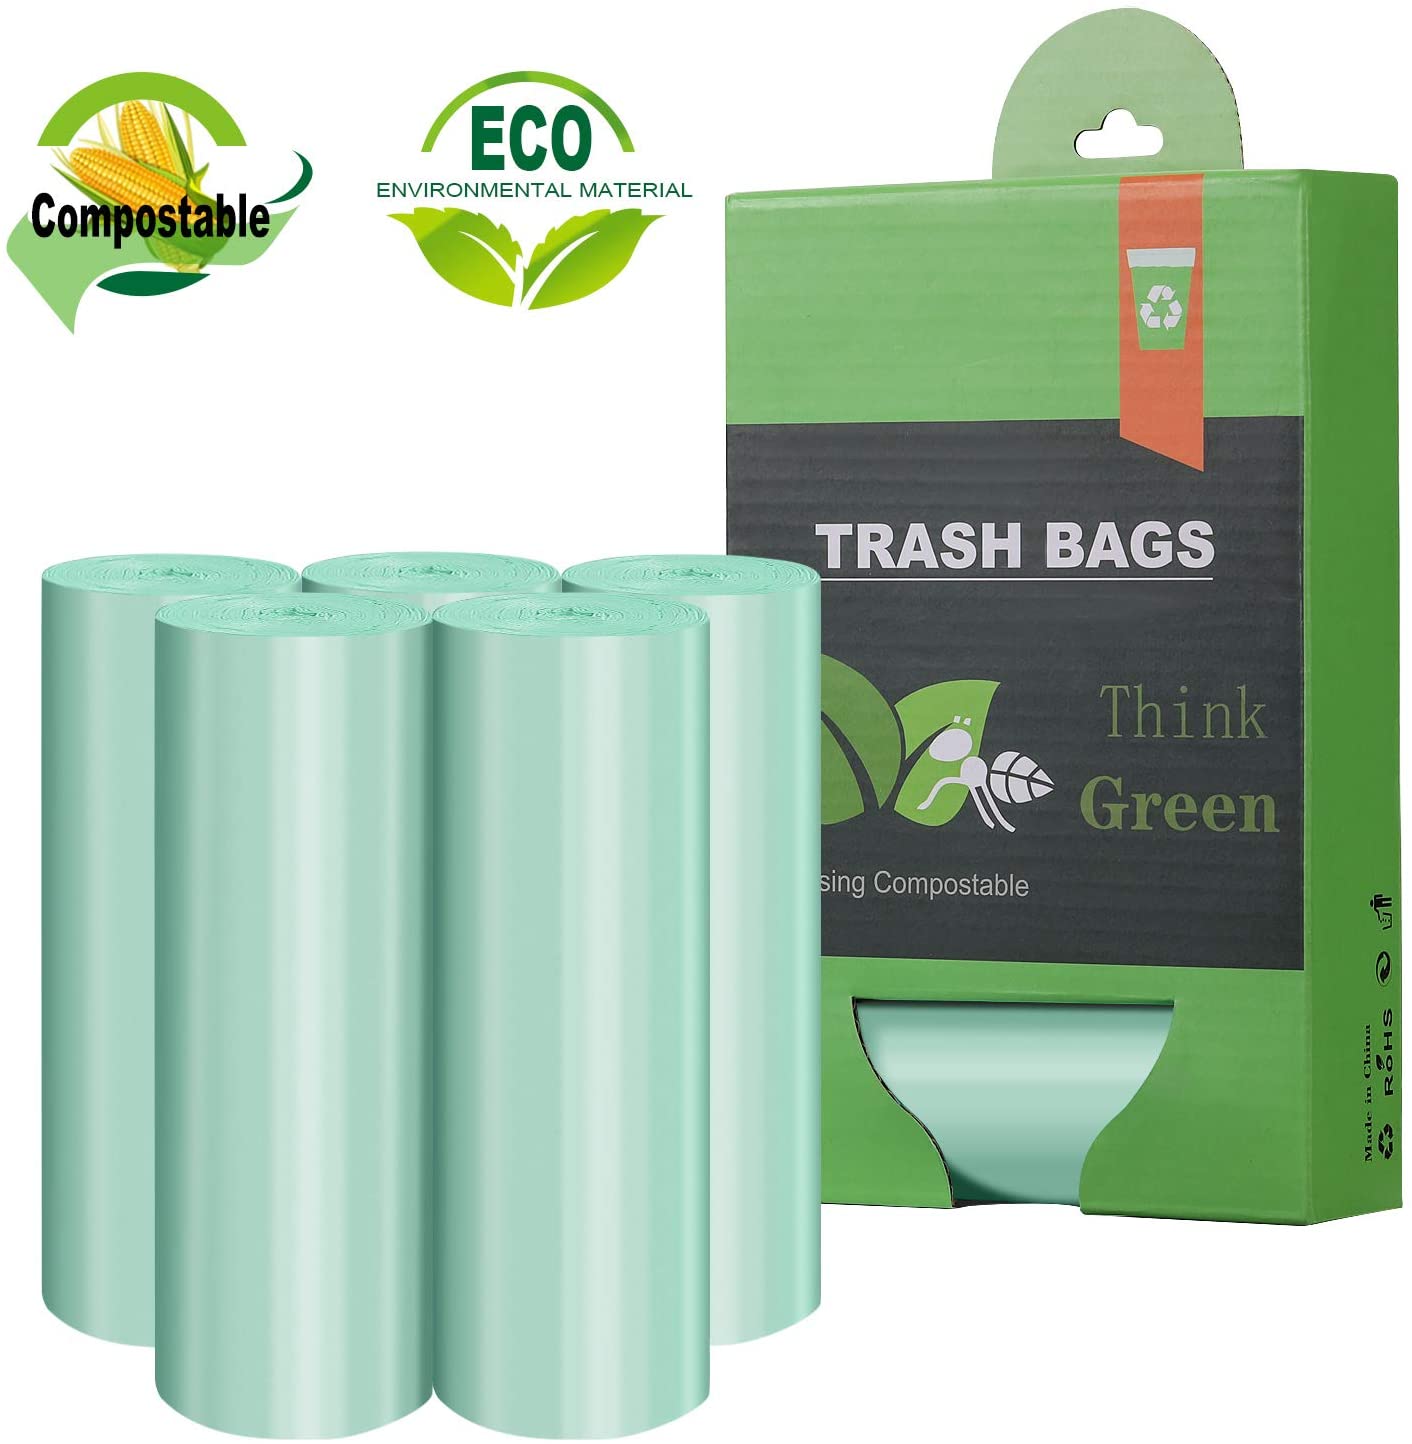  Vedein compostable trash bags(about 1.8 litres)4